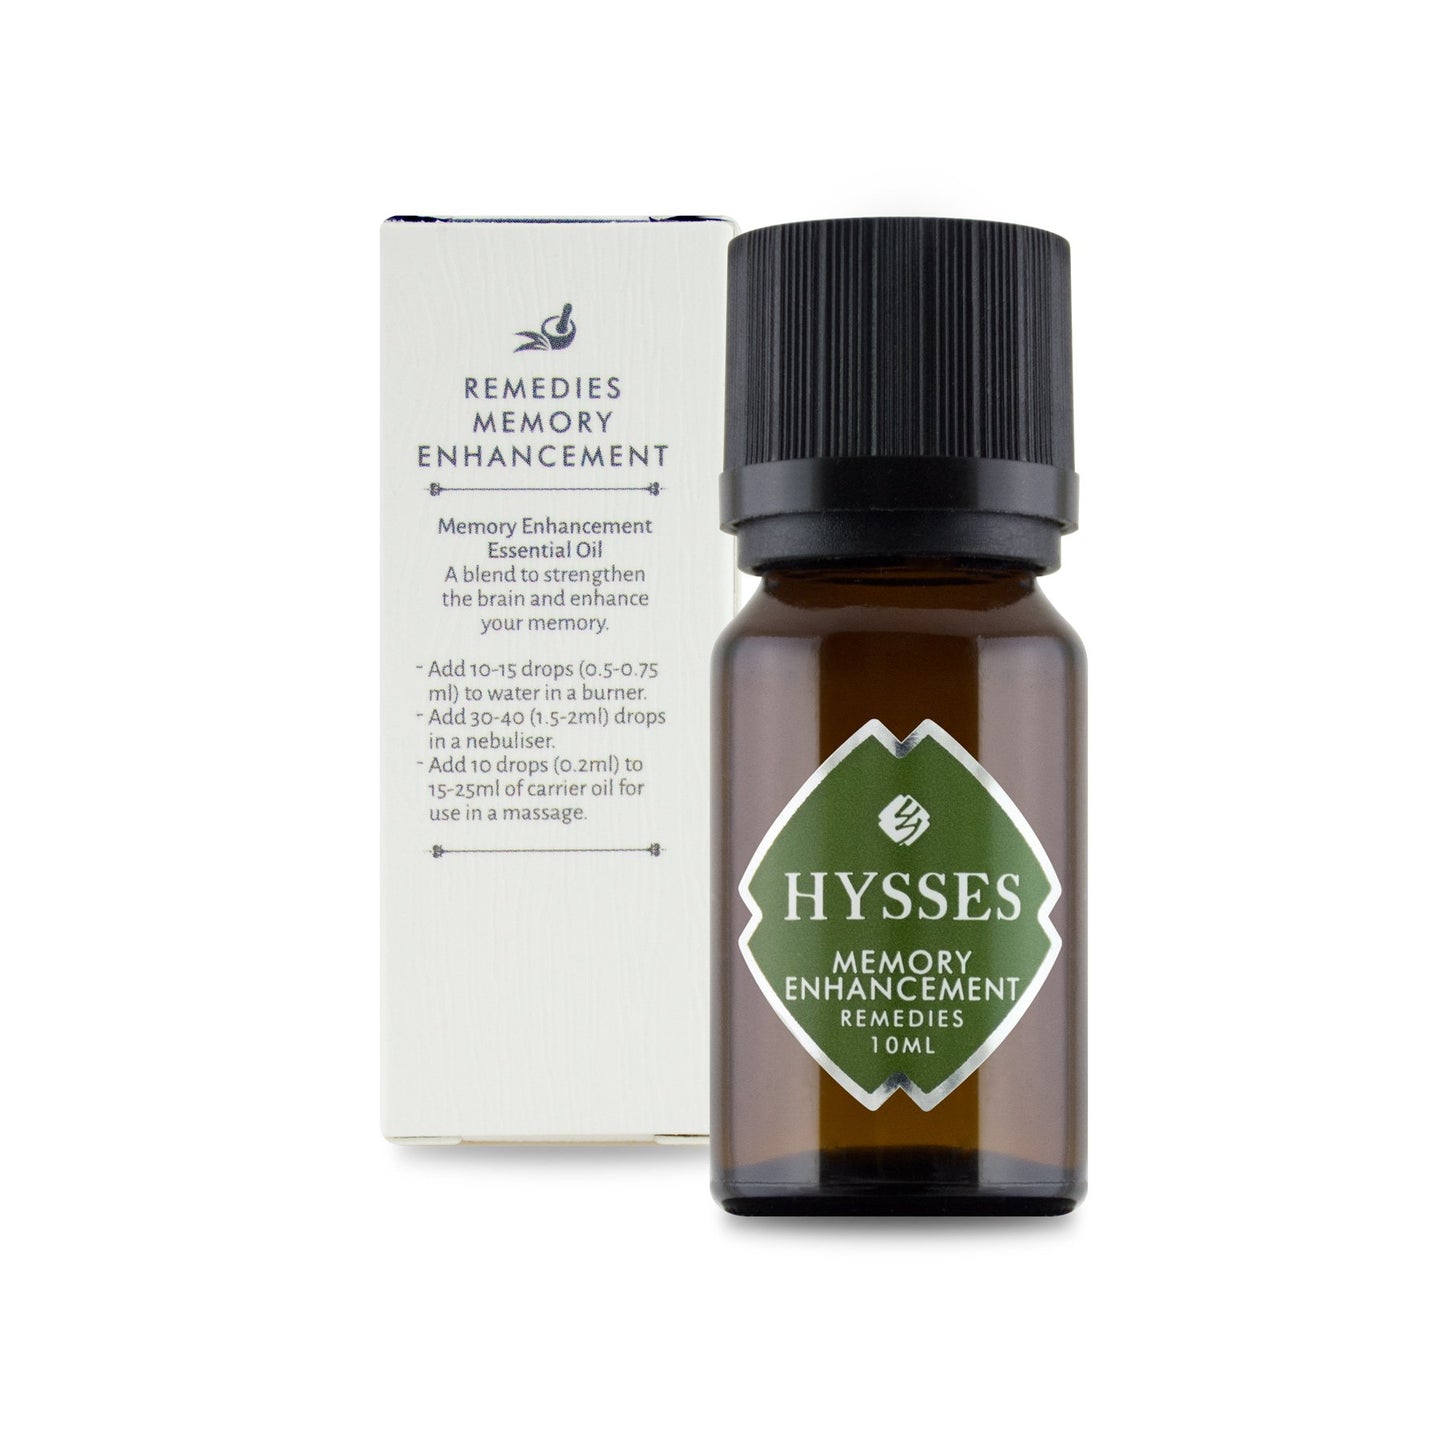 Hysses Essential Oils, Remedies Collection 10ml - Memory Enhancement